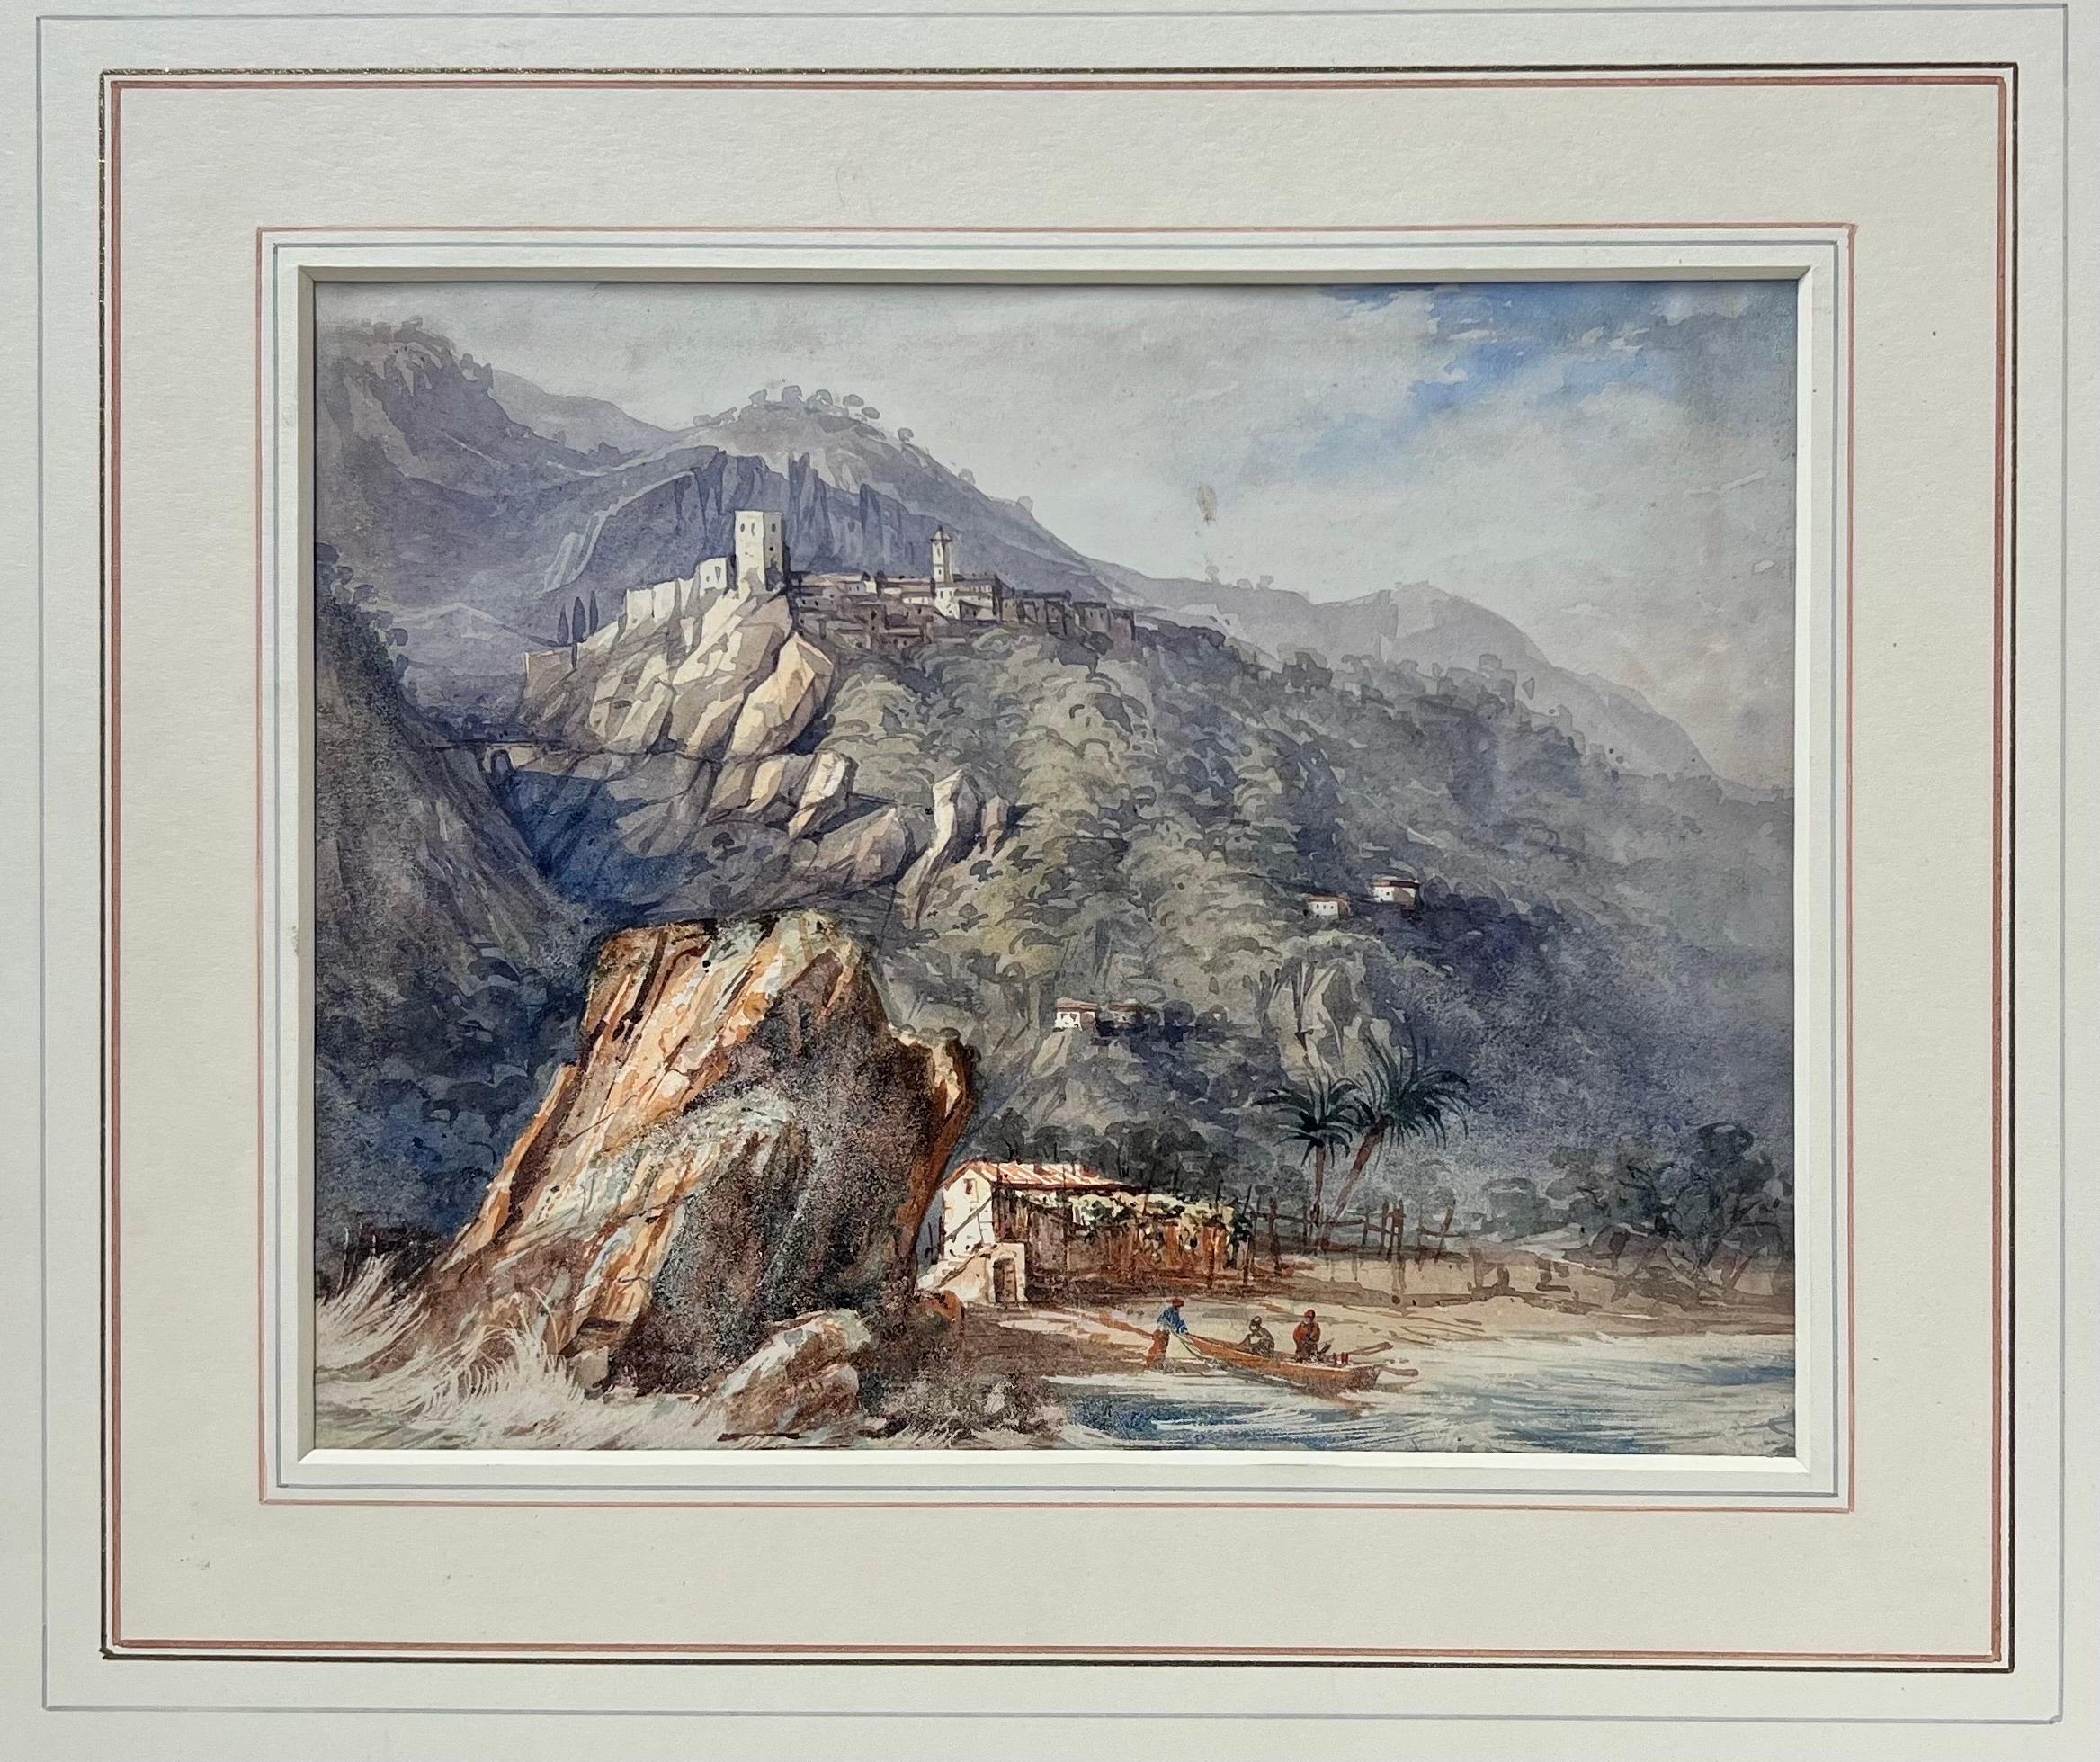 A Cliffside Town With Fisherman In The Bay Below Antique Watercolor Landscape - Victorian Art by William Page